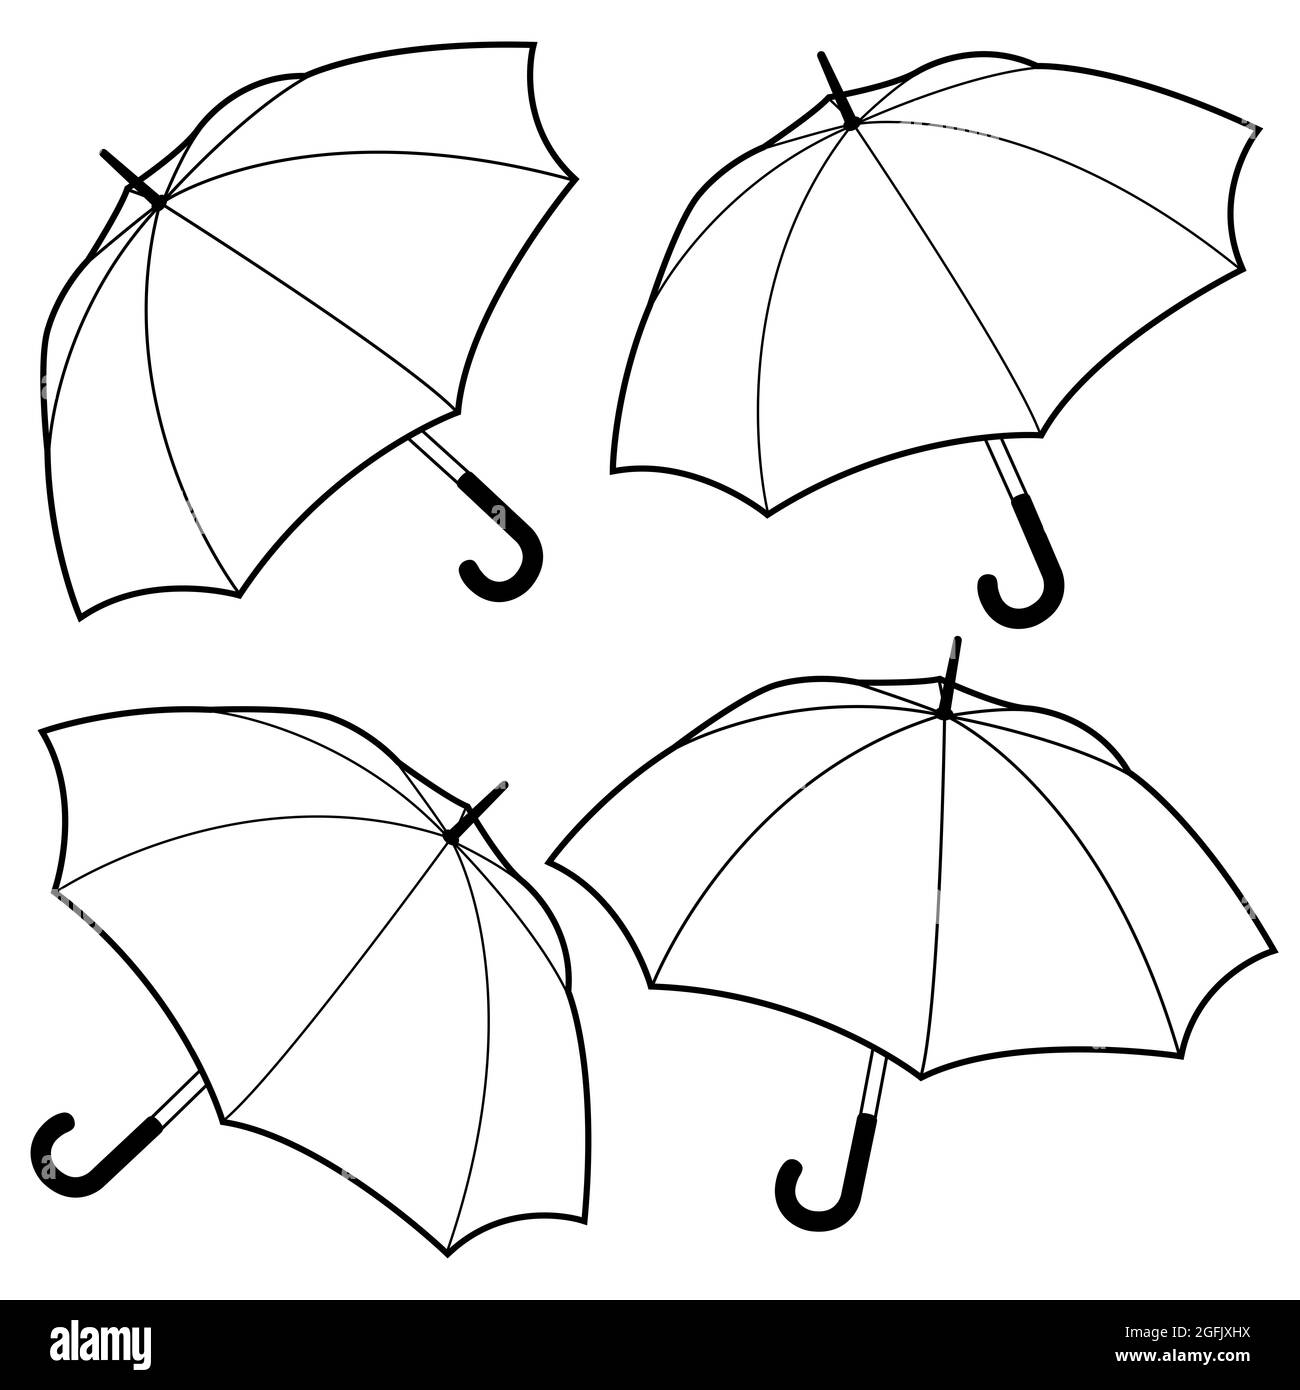 Set of umbrellas. Black and white coloring page Stock Photo - Alamy